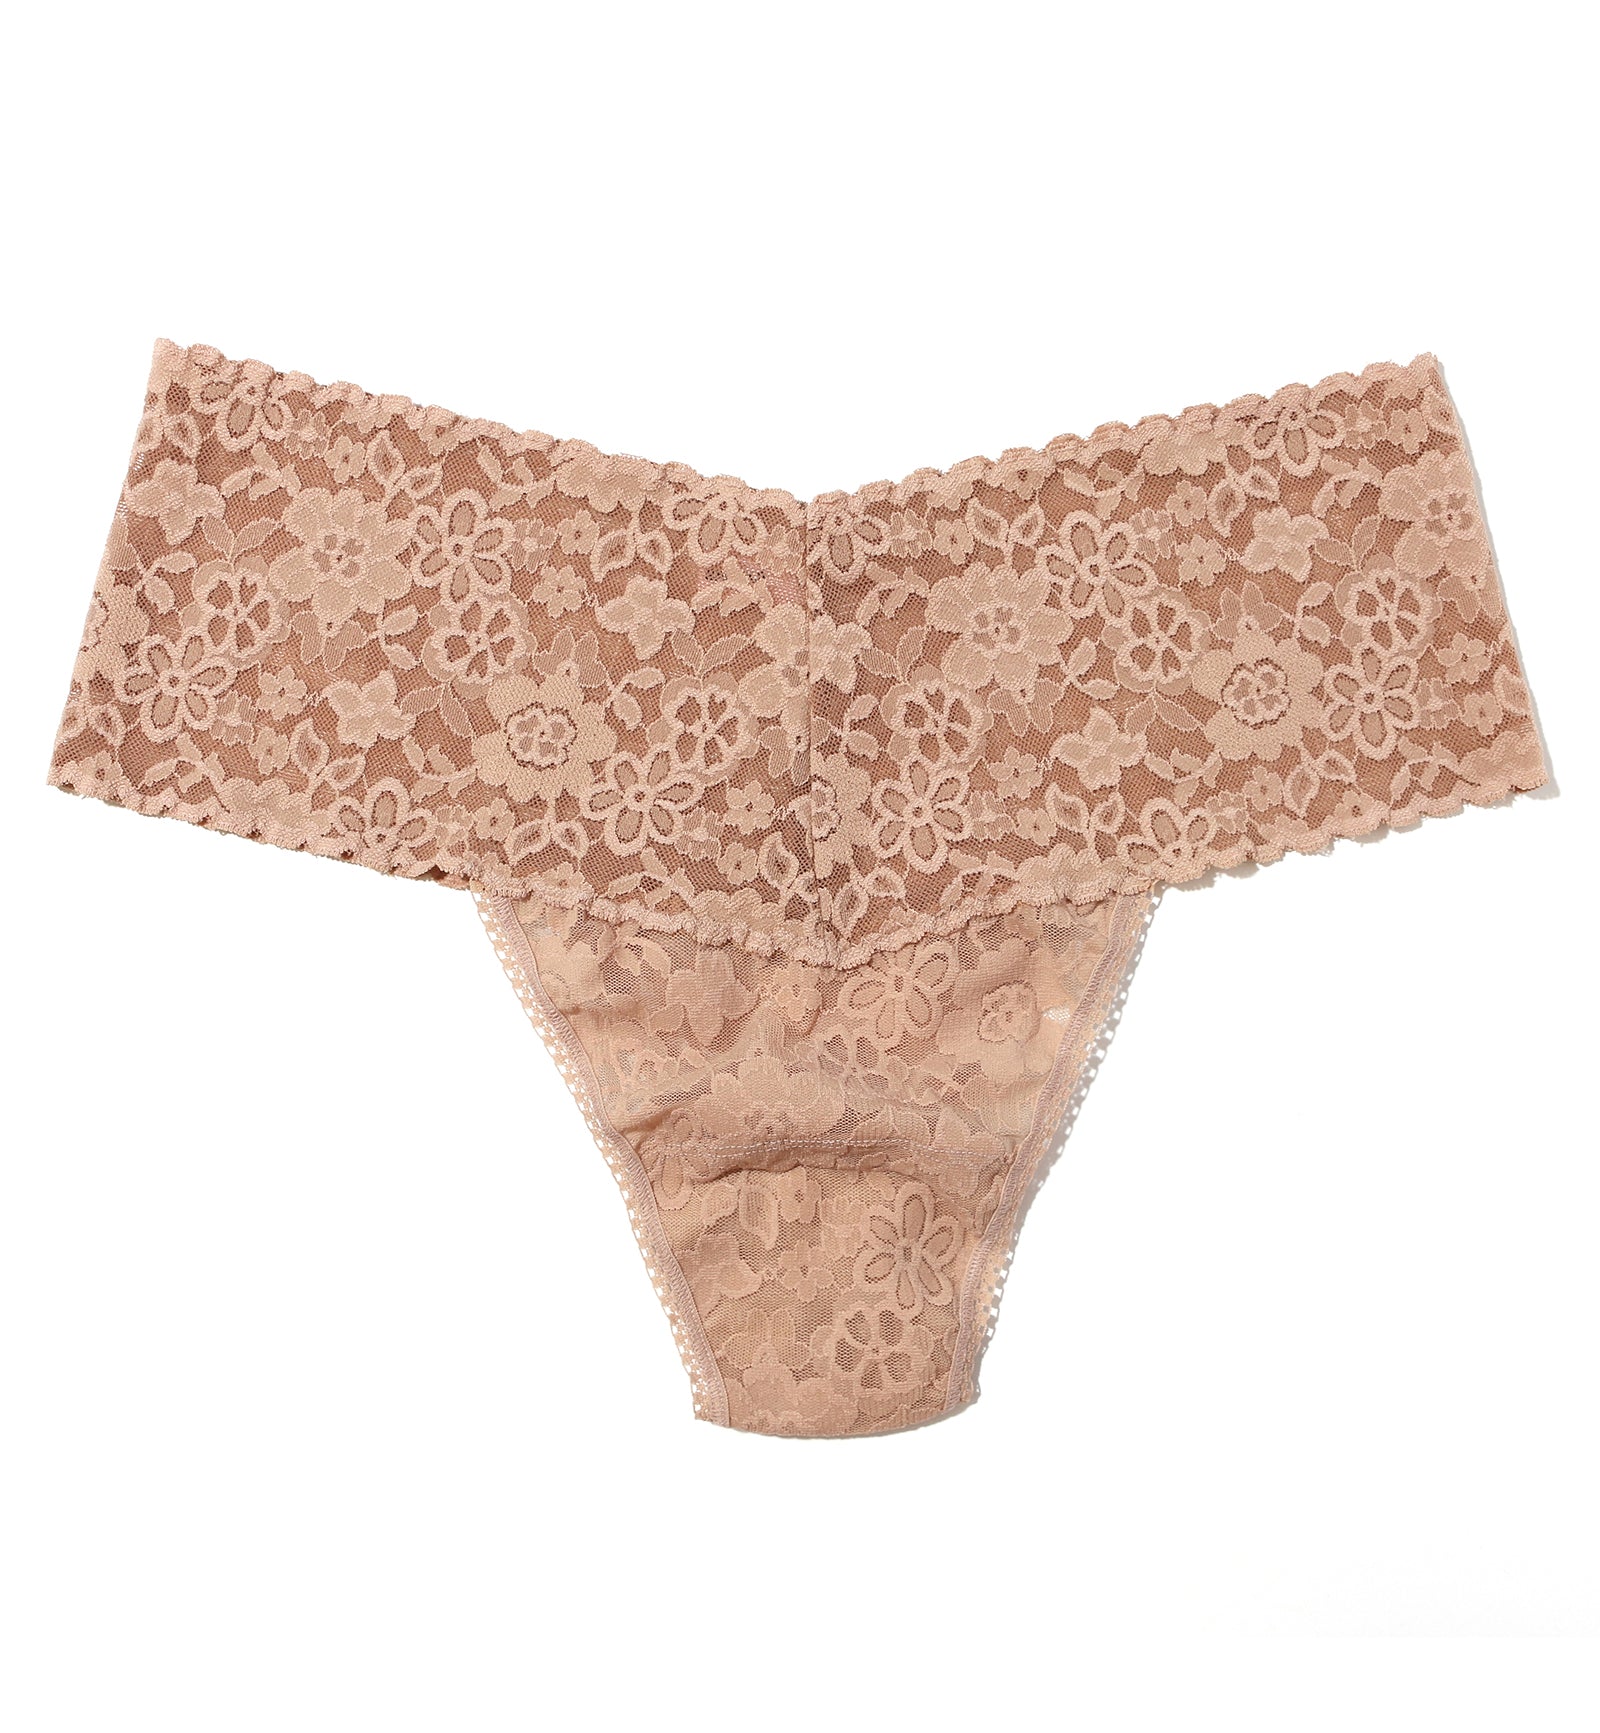 Hanky Panky Daily Lace Retro Thong PLUS (771922X),Taupe - Taupe,One Size